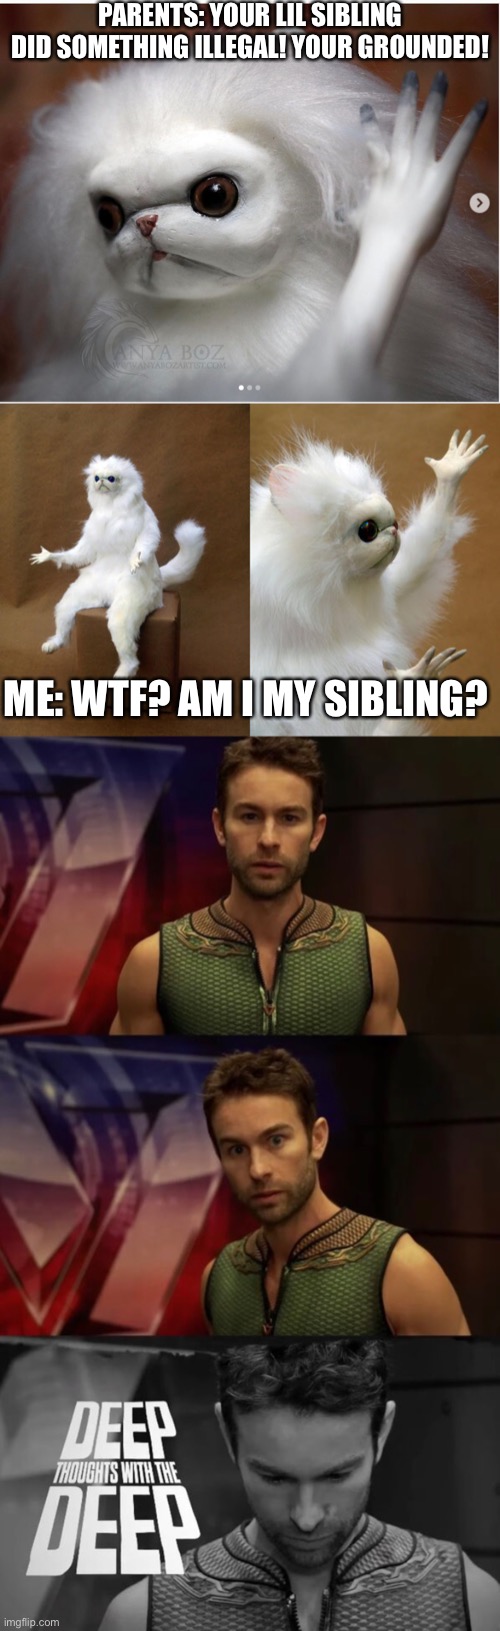 Partial credit to GreenTelevisionGames | PARENTS: YOUR LIL SIBLING DID SOMETHING ILLEGAL! YOUR GROUNDED! ME: WTF? AM I MY SIBLING? | image tagged in cat slap,memes,persian cat room guardian,deep thoughts with the deep | made w/ Imgflip meme maker